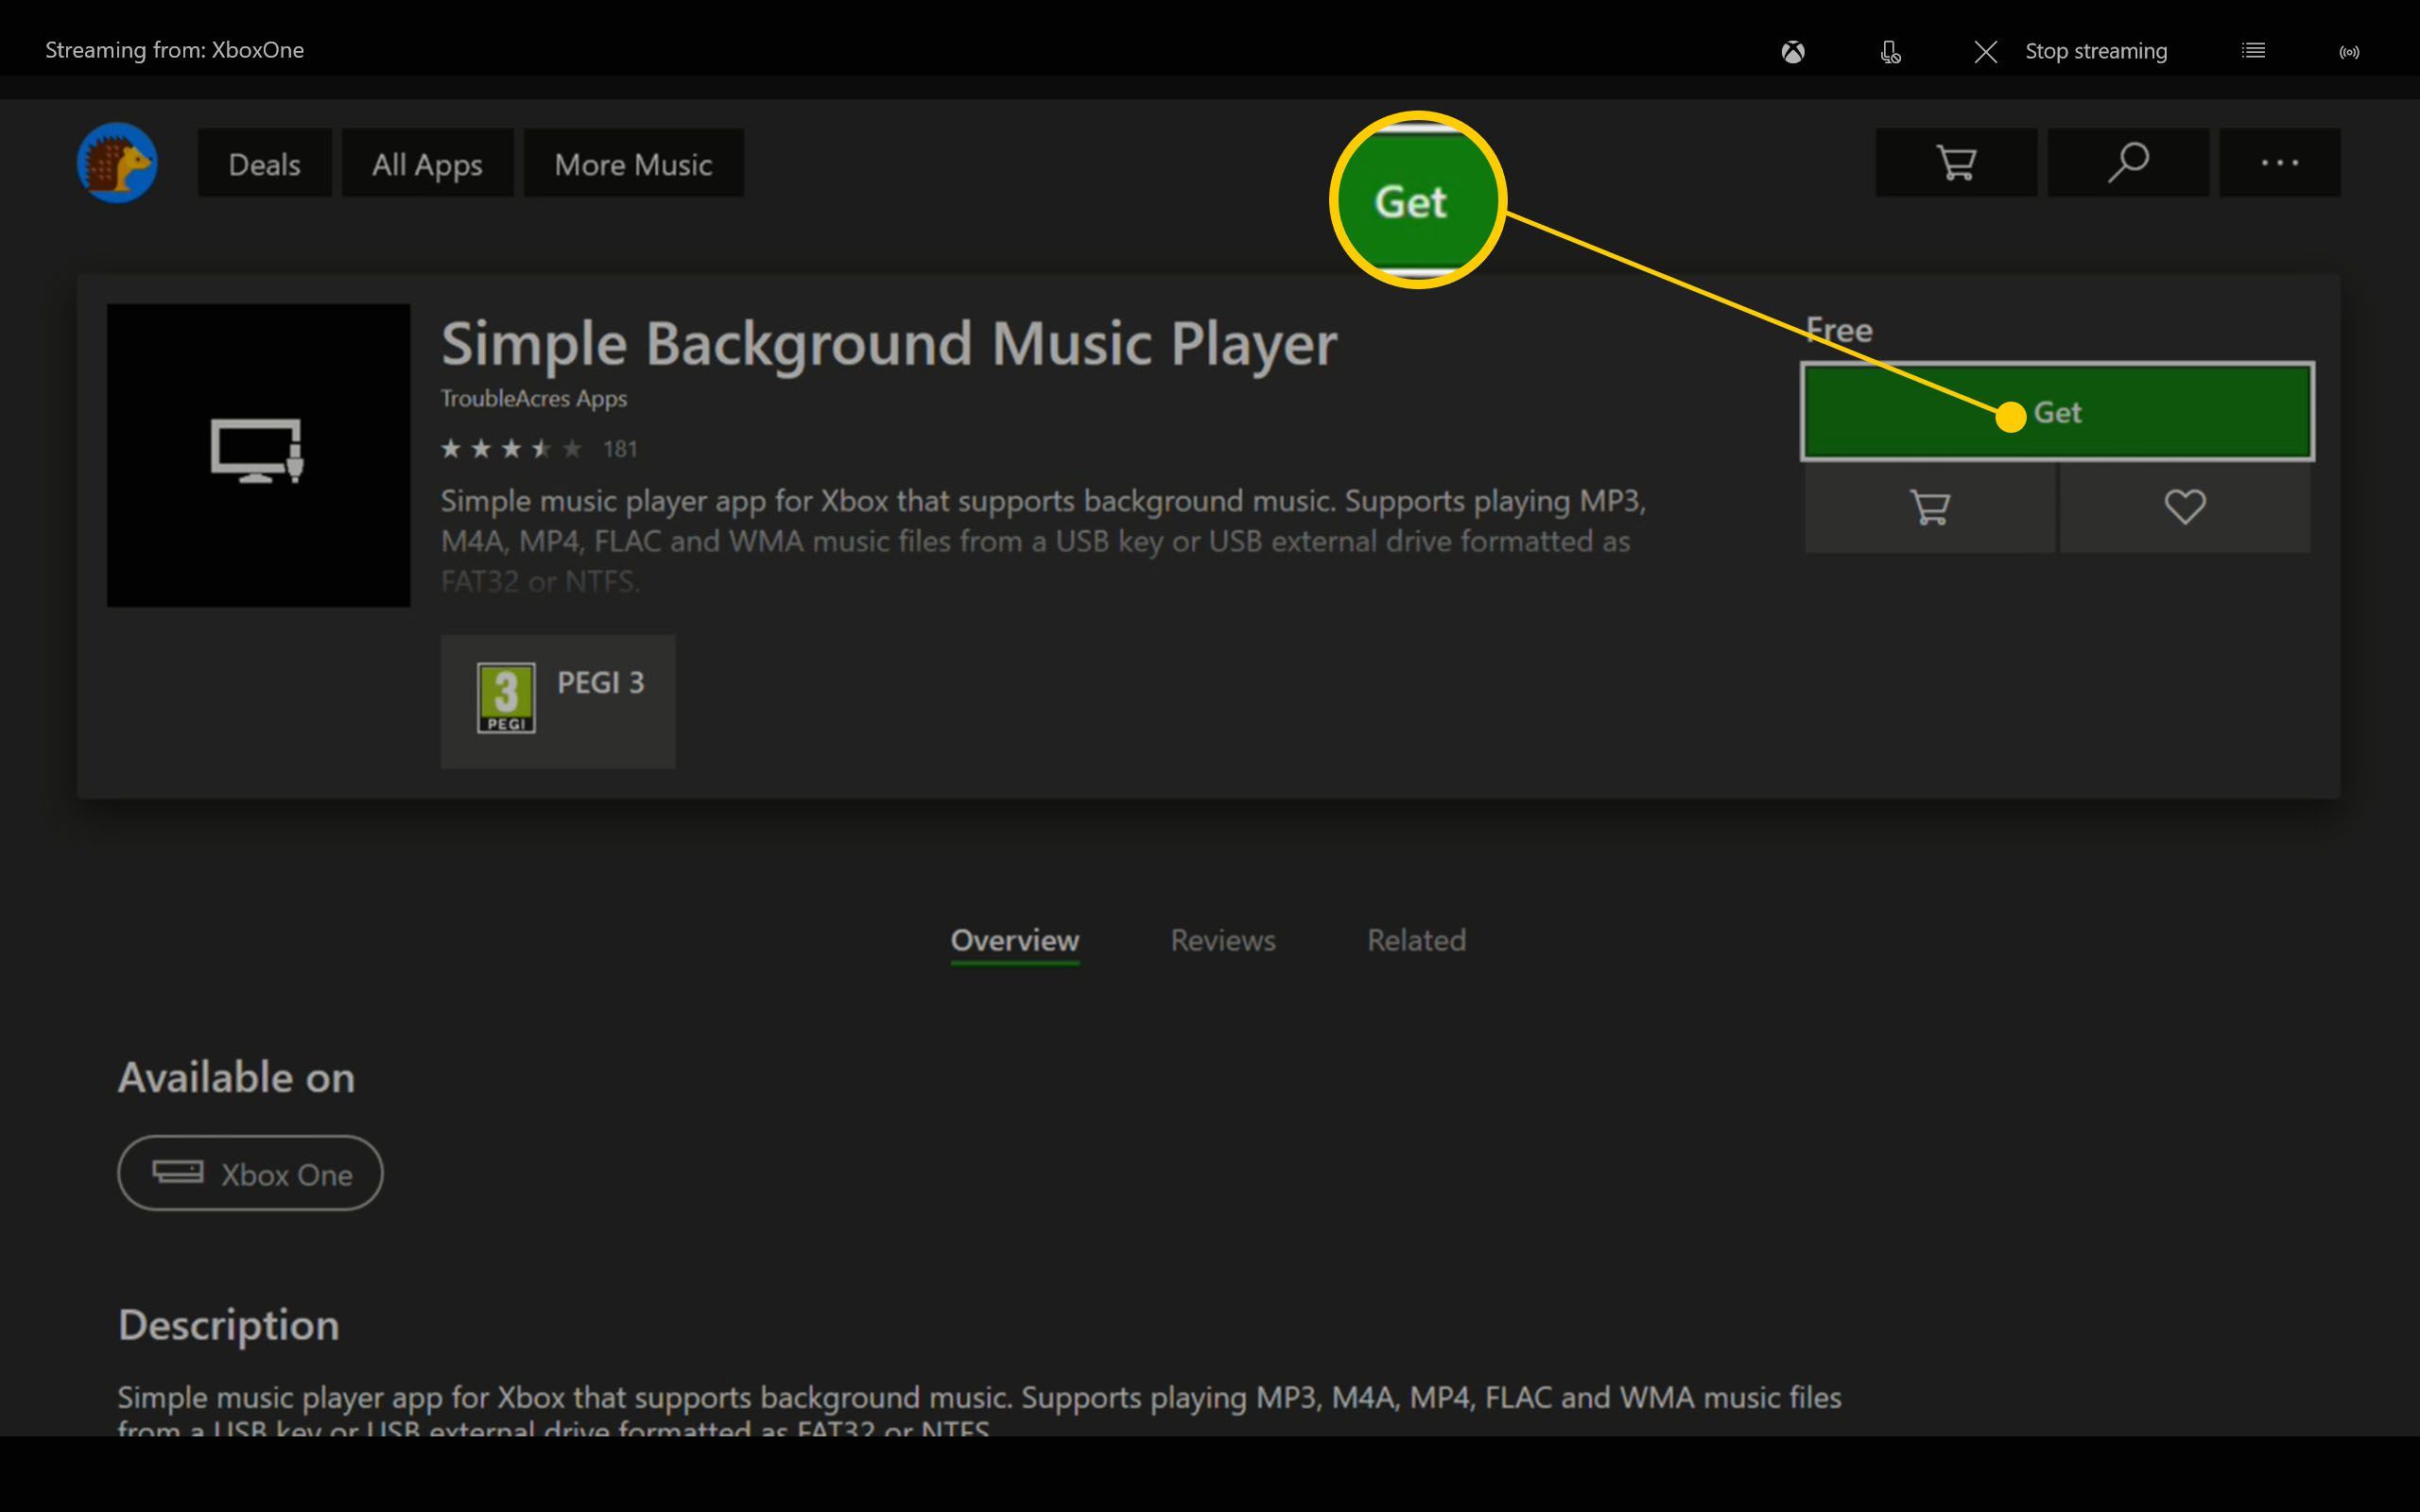 Магазин Xbox One с'get' button highlighted for purchases